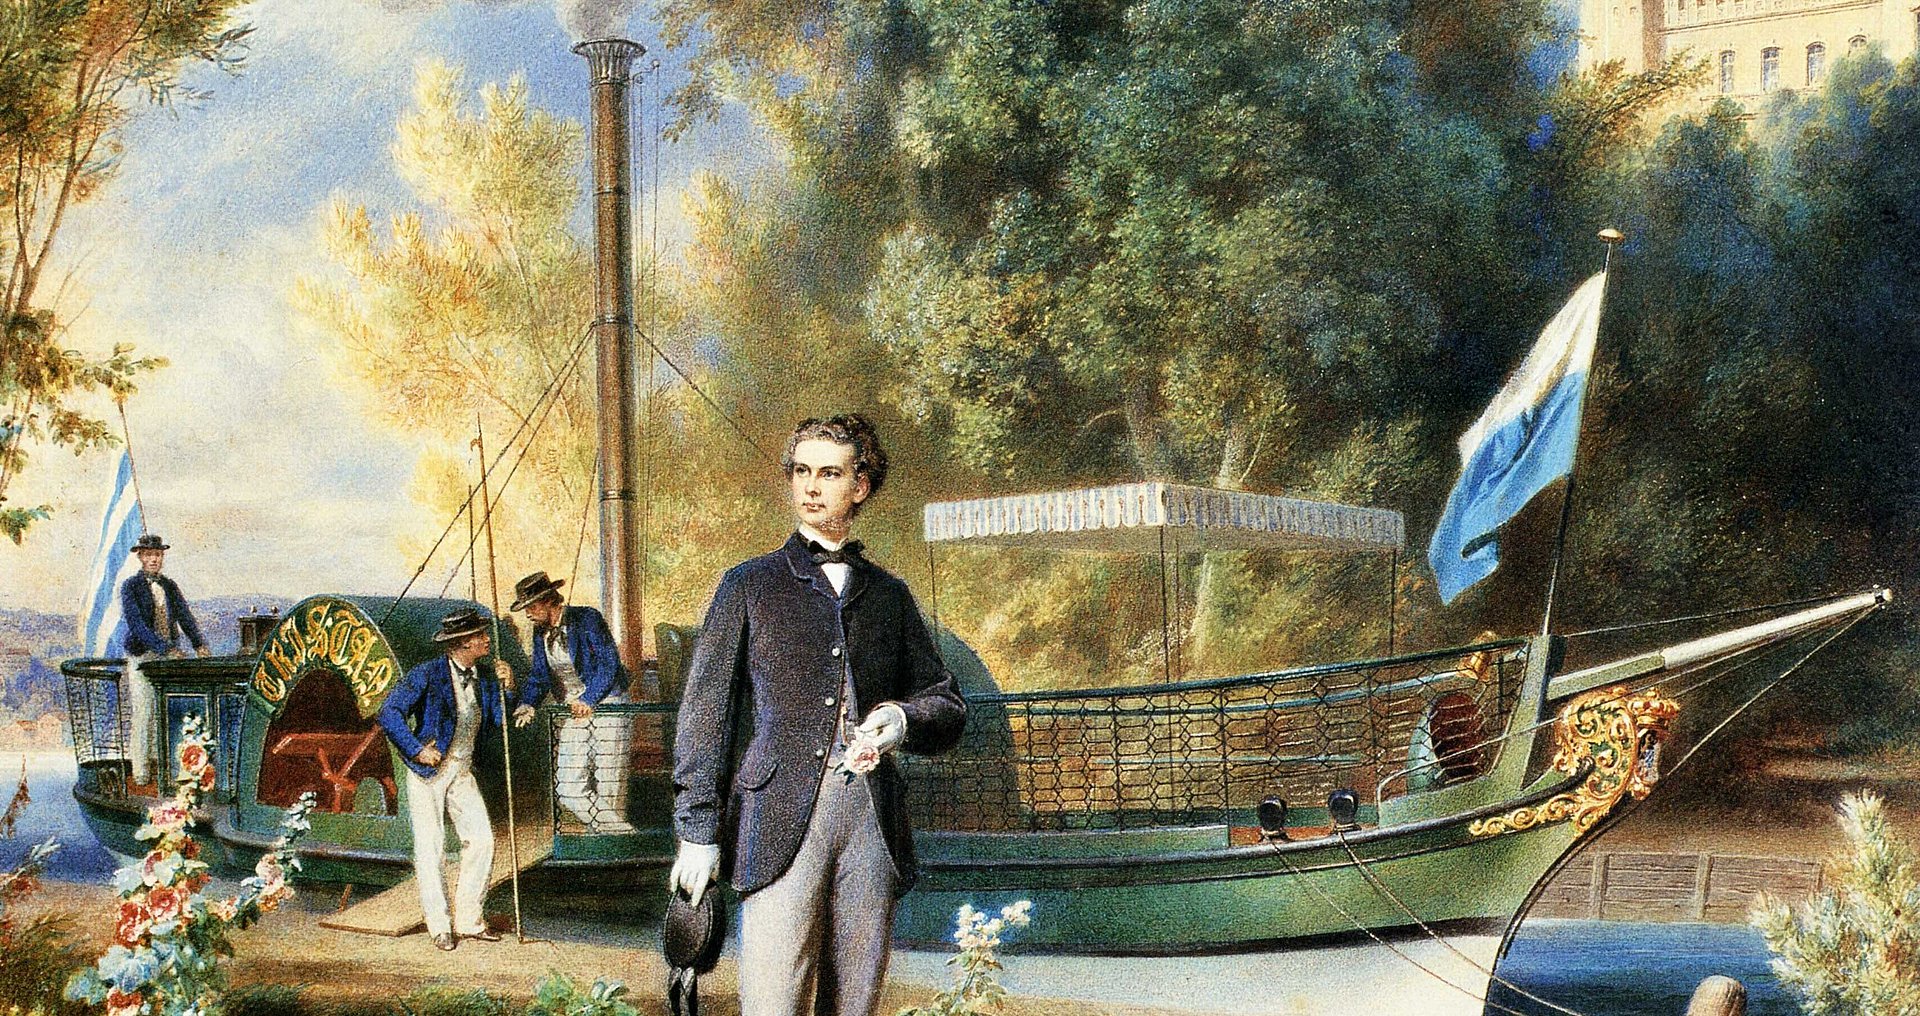 Postcard after a watercolor depicting King Ludwig II in front of his steamship "Tristan".